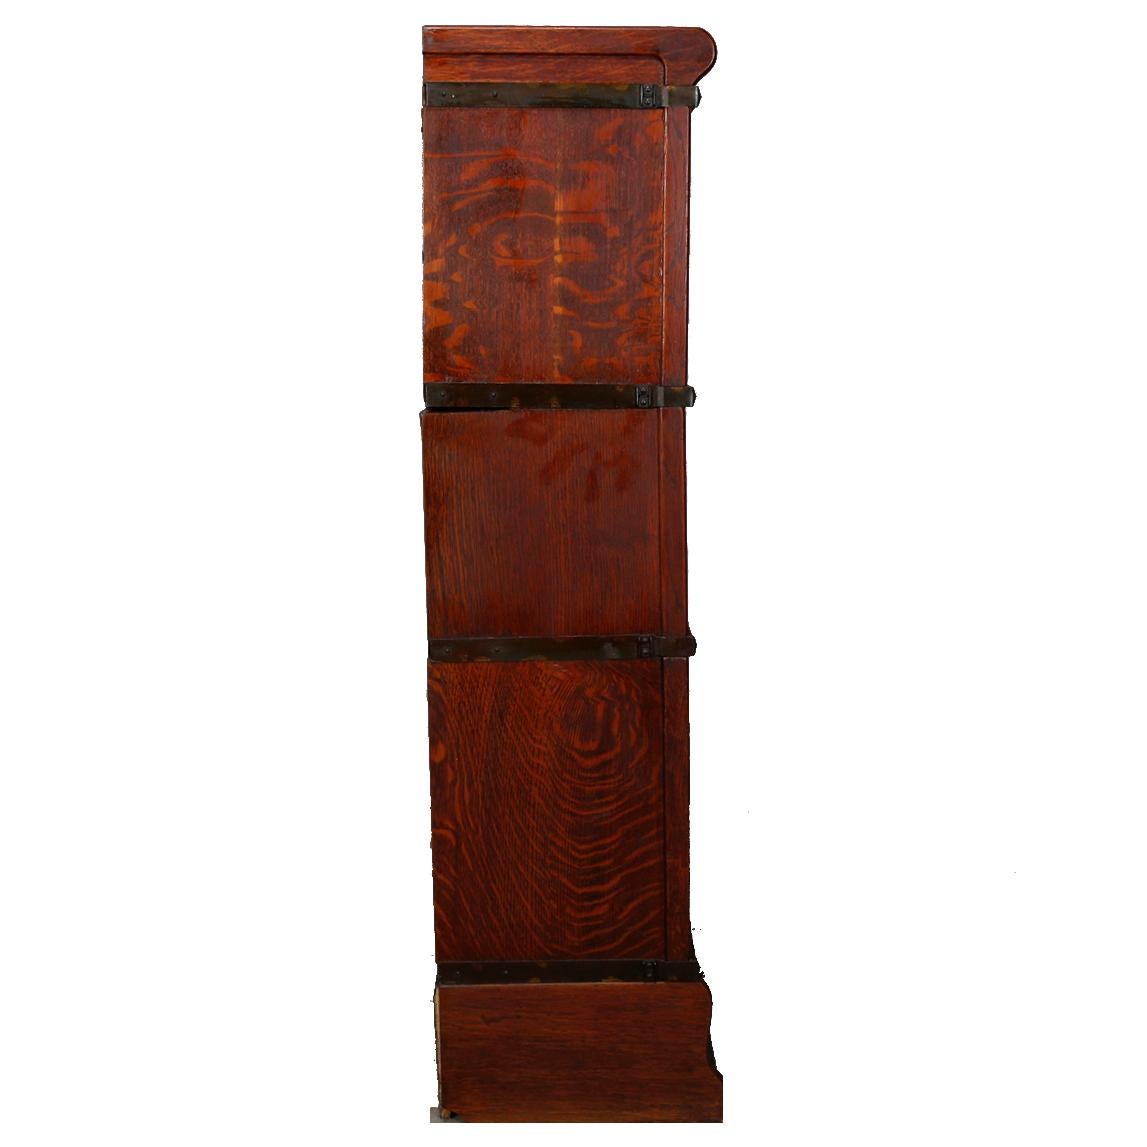 An antique Arts & Crafts barrister bookcase by Globe Wernicke offers quarter sawn oak construction with three stacks having pull out glass doors over lower ogee form drawer, original maker label as photographed, circa 1910

Measures: 47.25